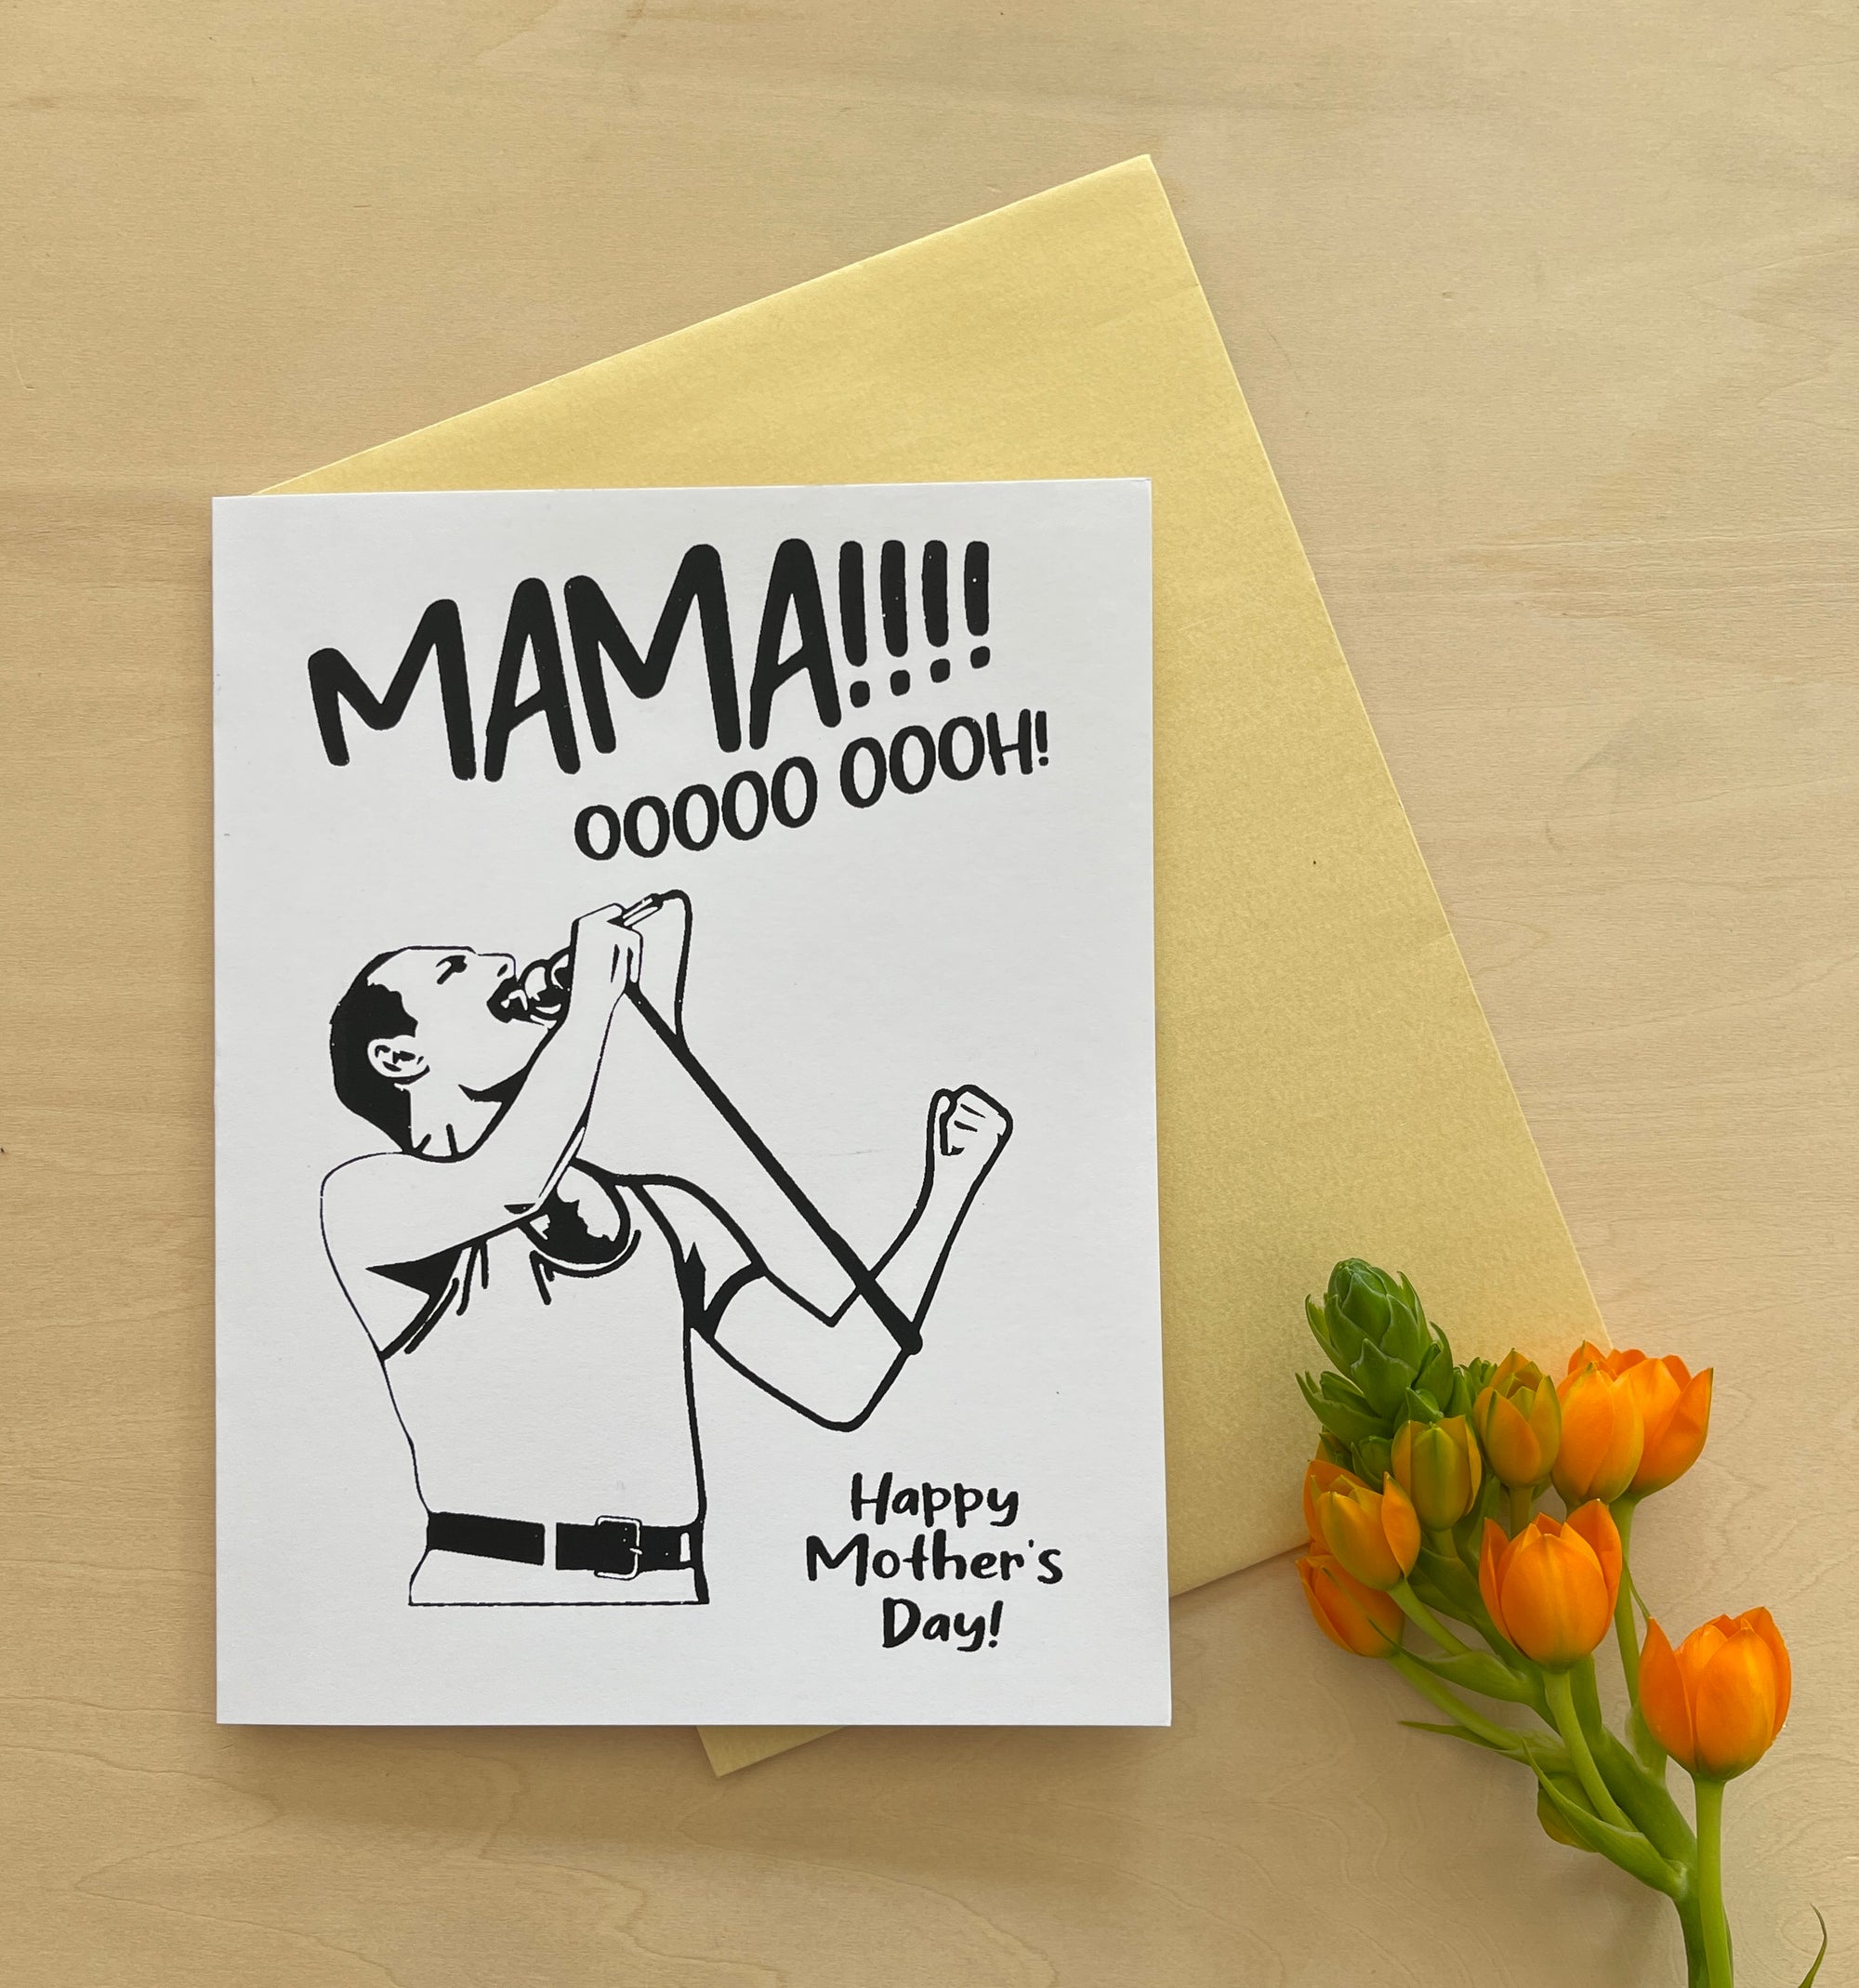 Mama, OOOHH, Freddie Mercury Funny Mother's Day Card